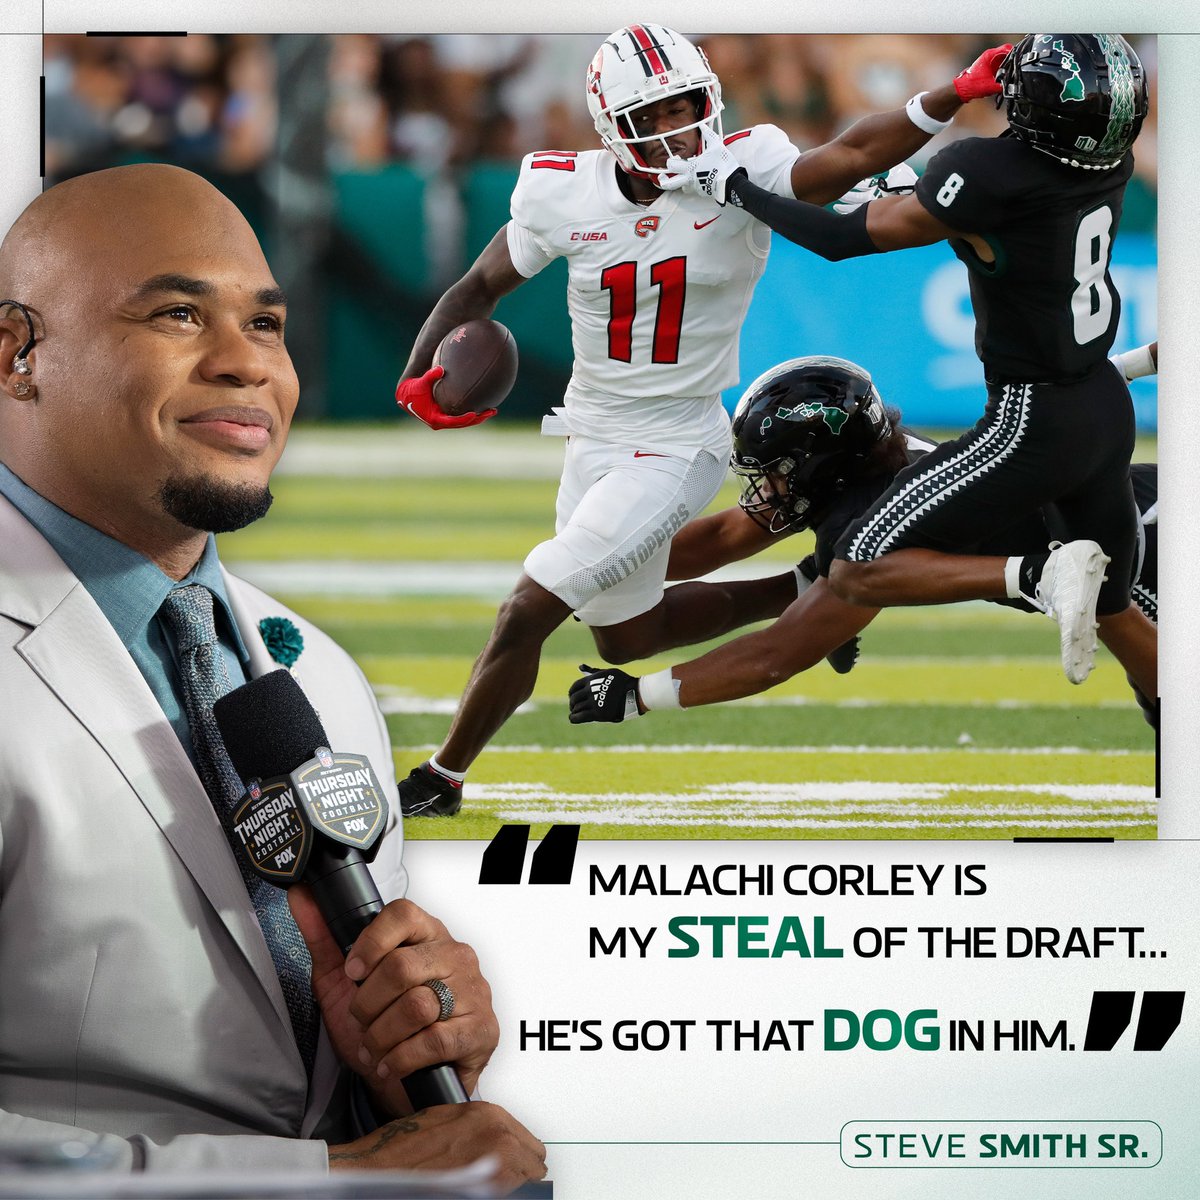 .@CorleyMalachi is going to do big things in the green and white.